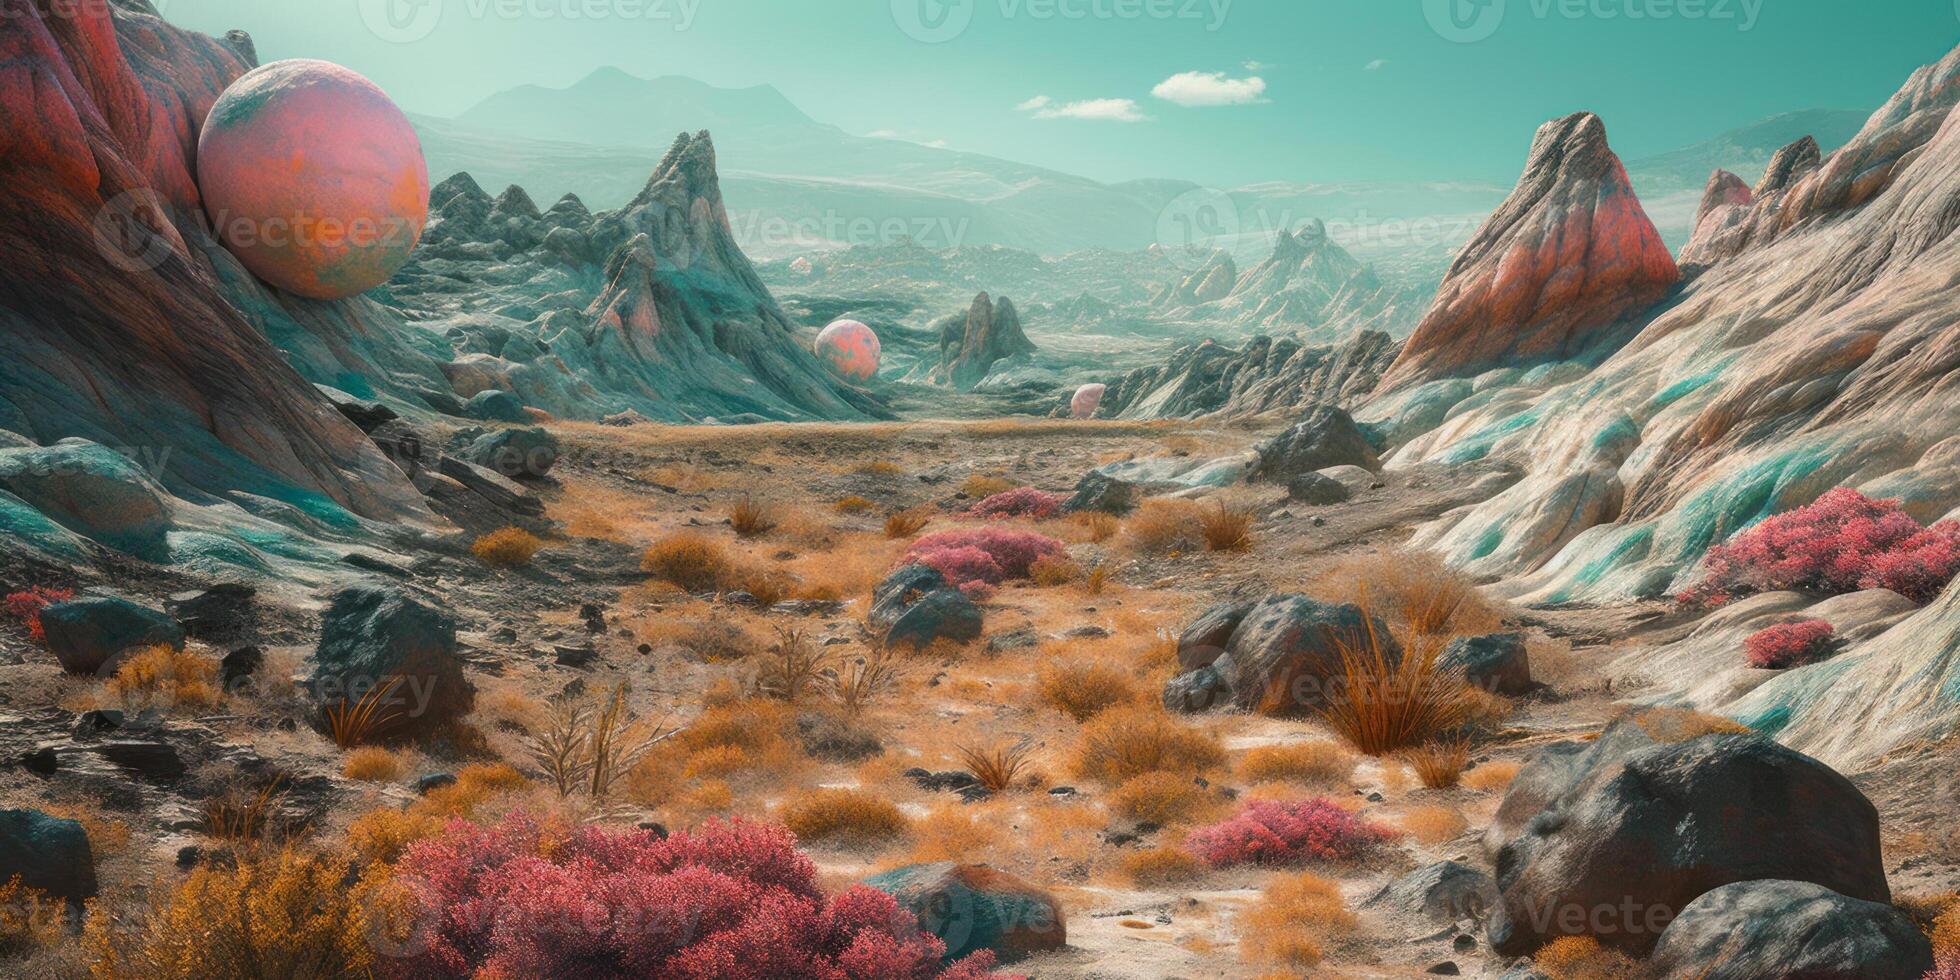 space mountain desert landscape of new planet photo